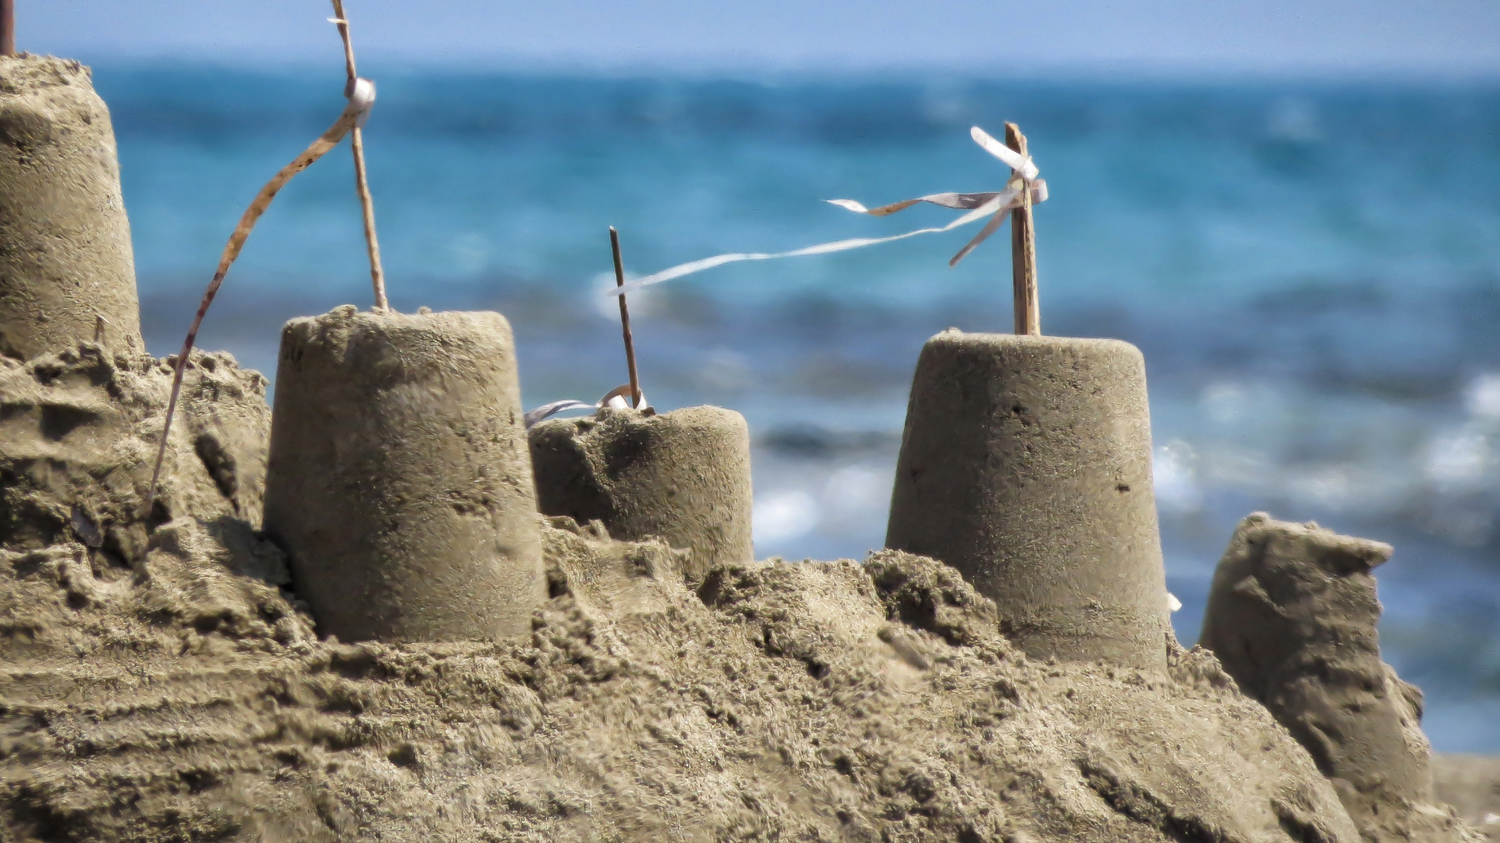 Sandcastles with stick flags on a beach